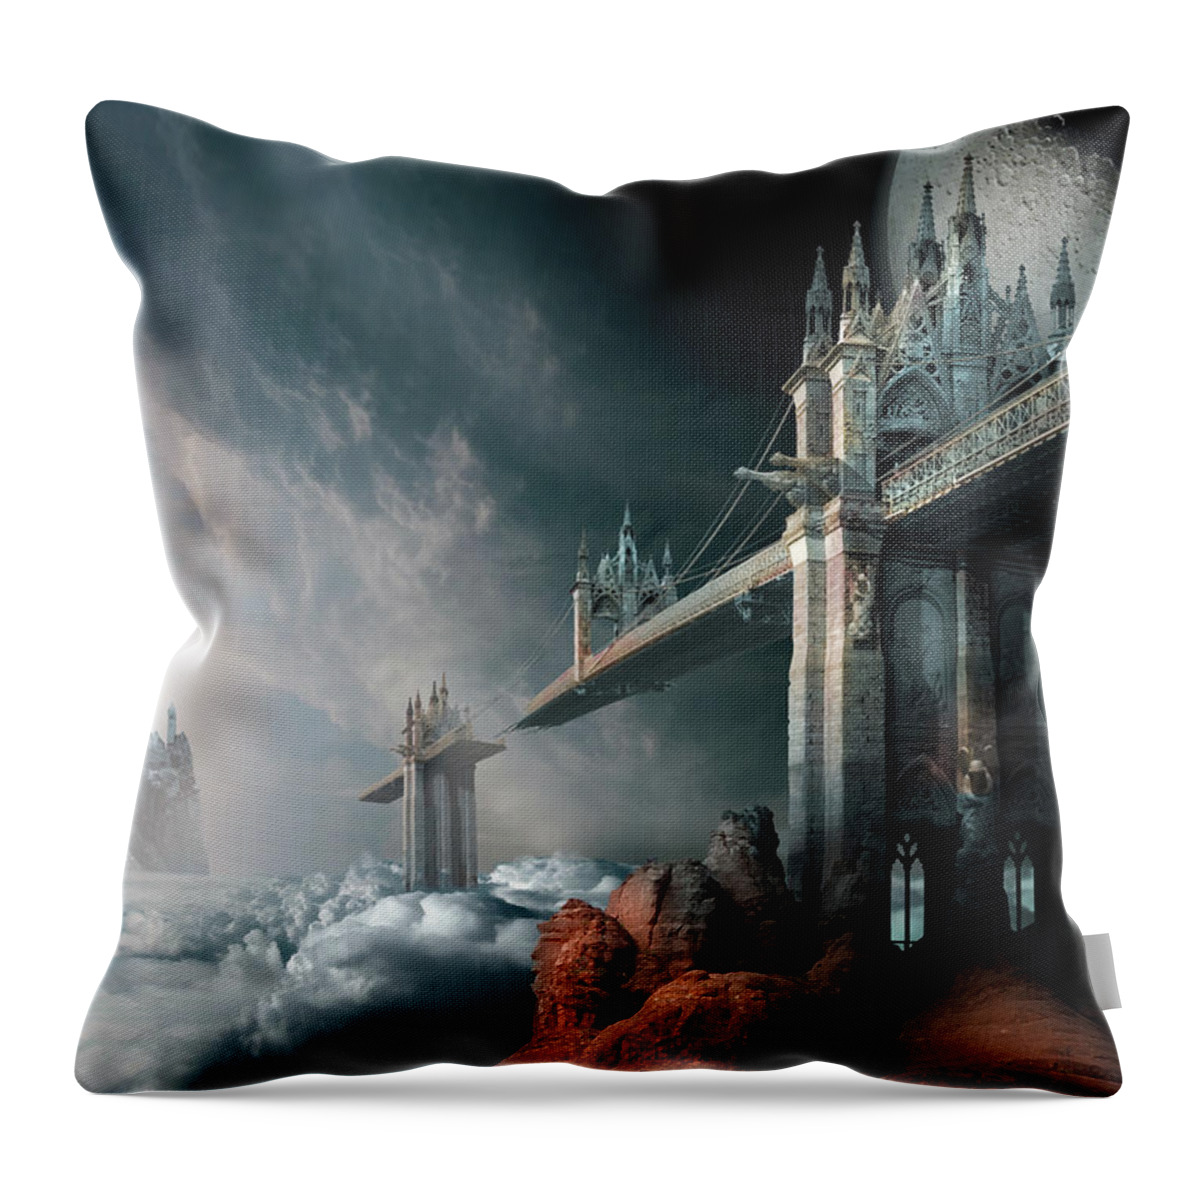 Sky Clouds Rainbow Bridge Haven Gothic Architecture Broken Island Moon Throw Pillow featuring the digital art Bridges to the Neverland by George Grie